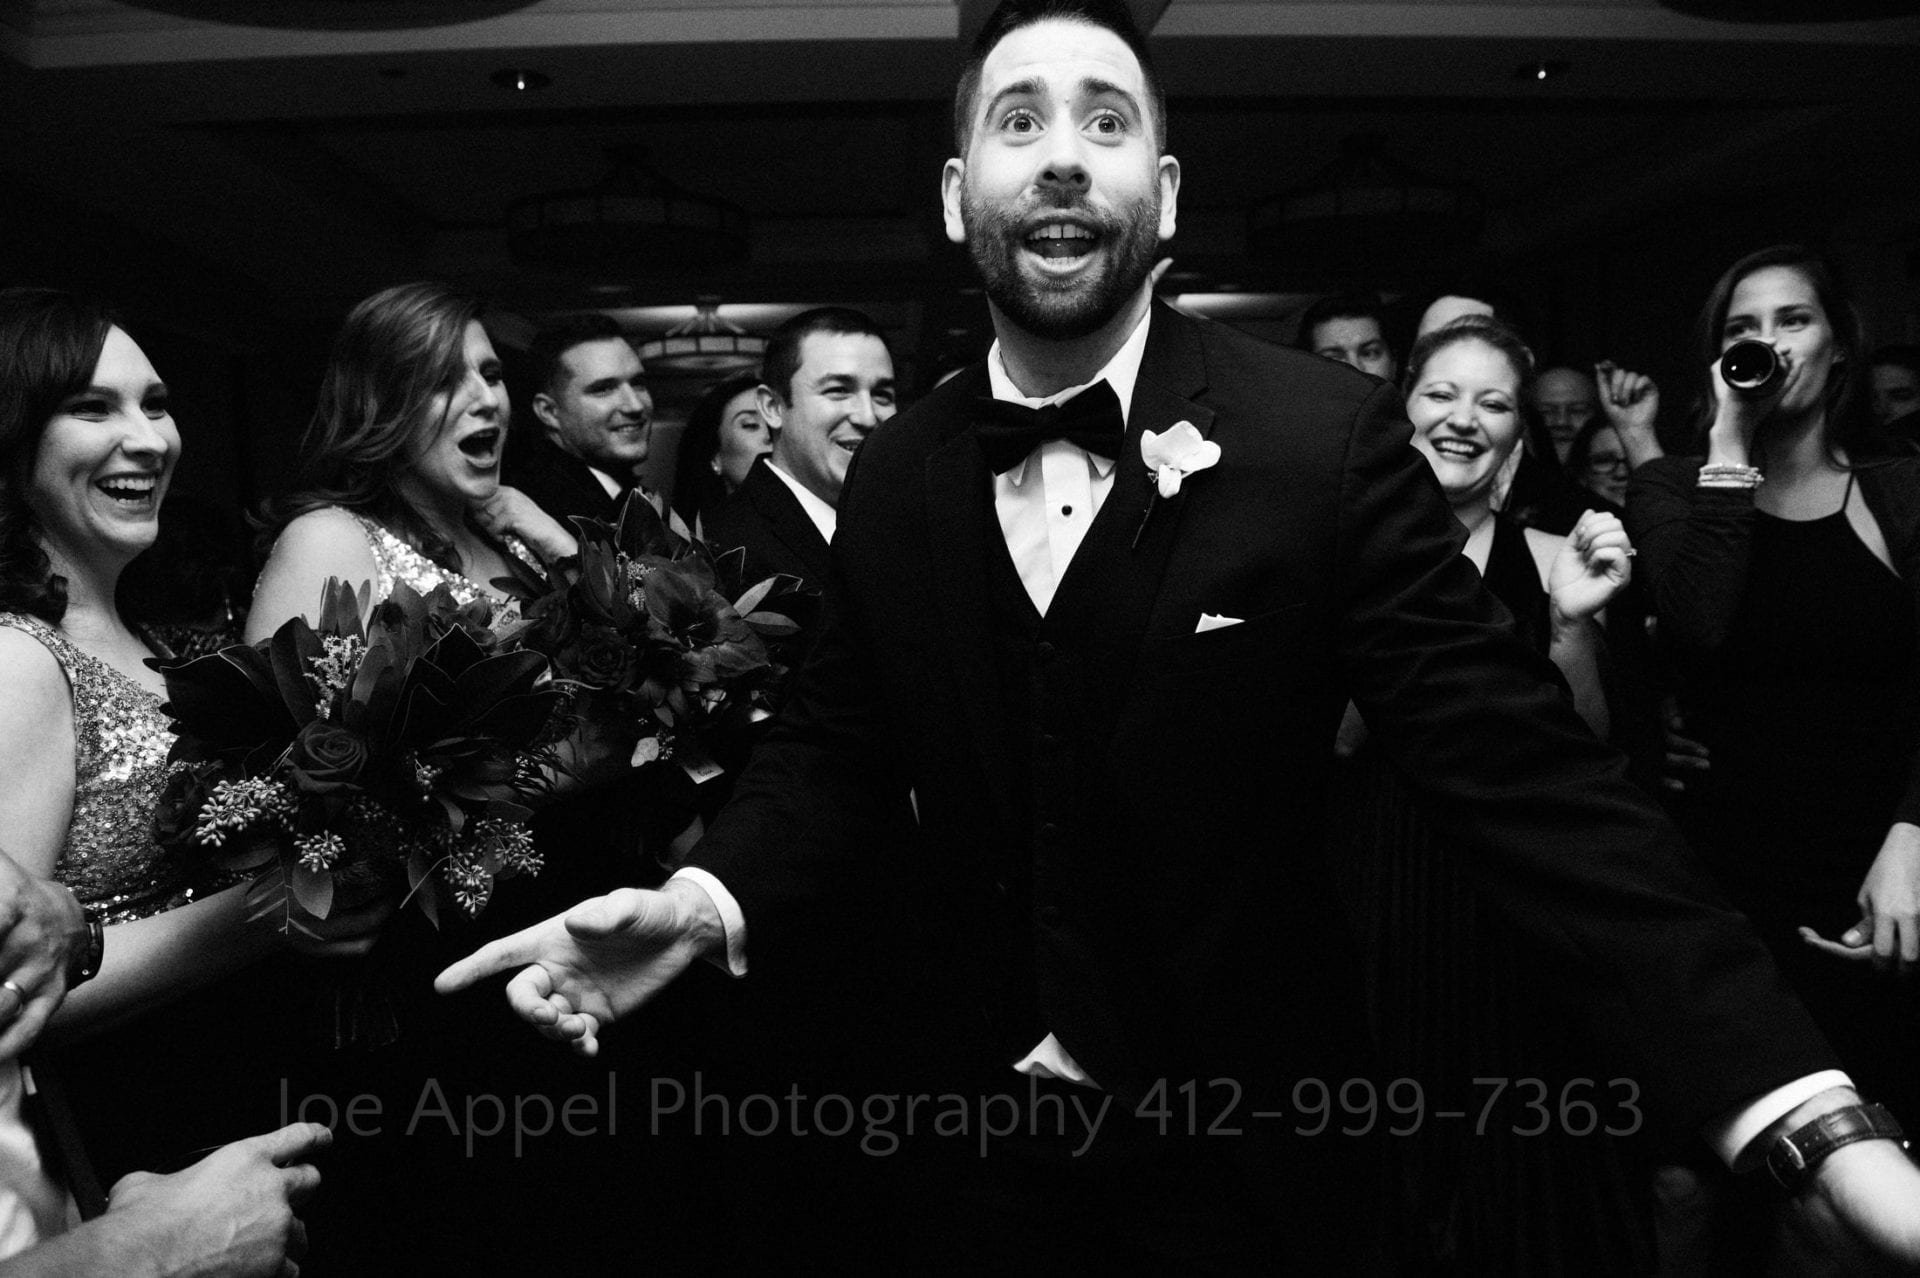 A groom dances in the foreground of the frame while guests surround him.